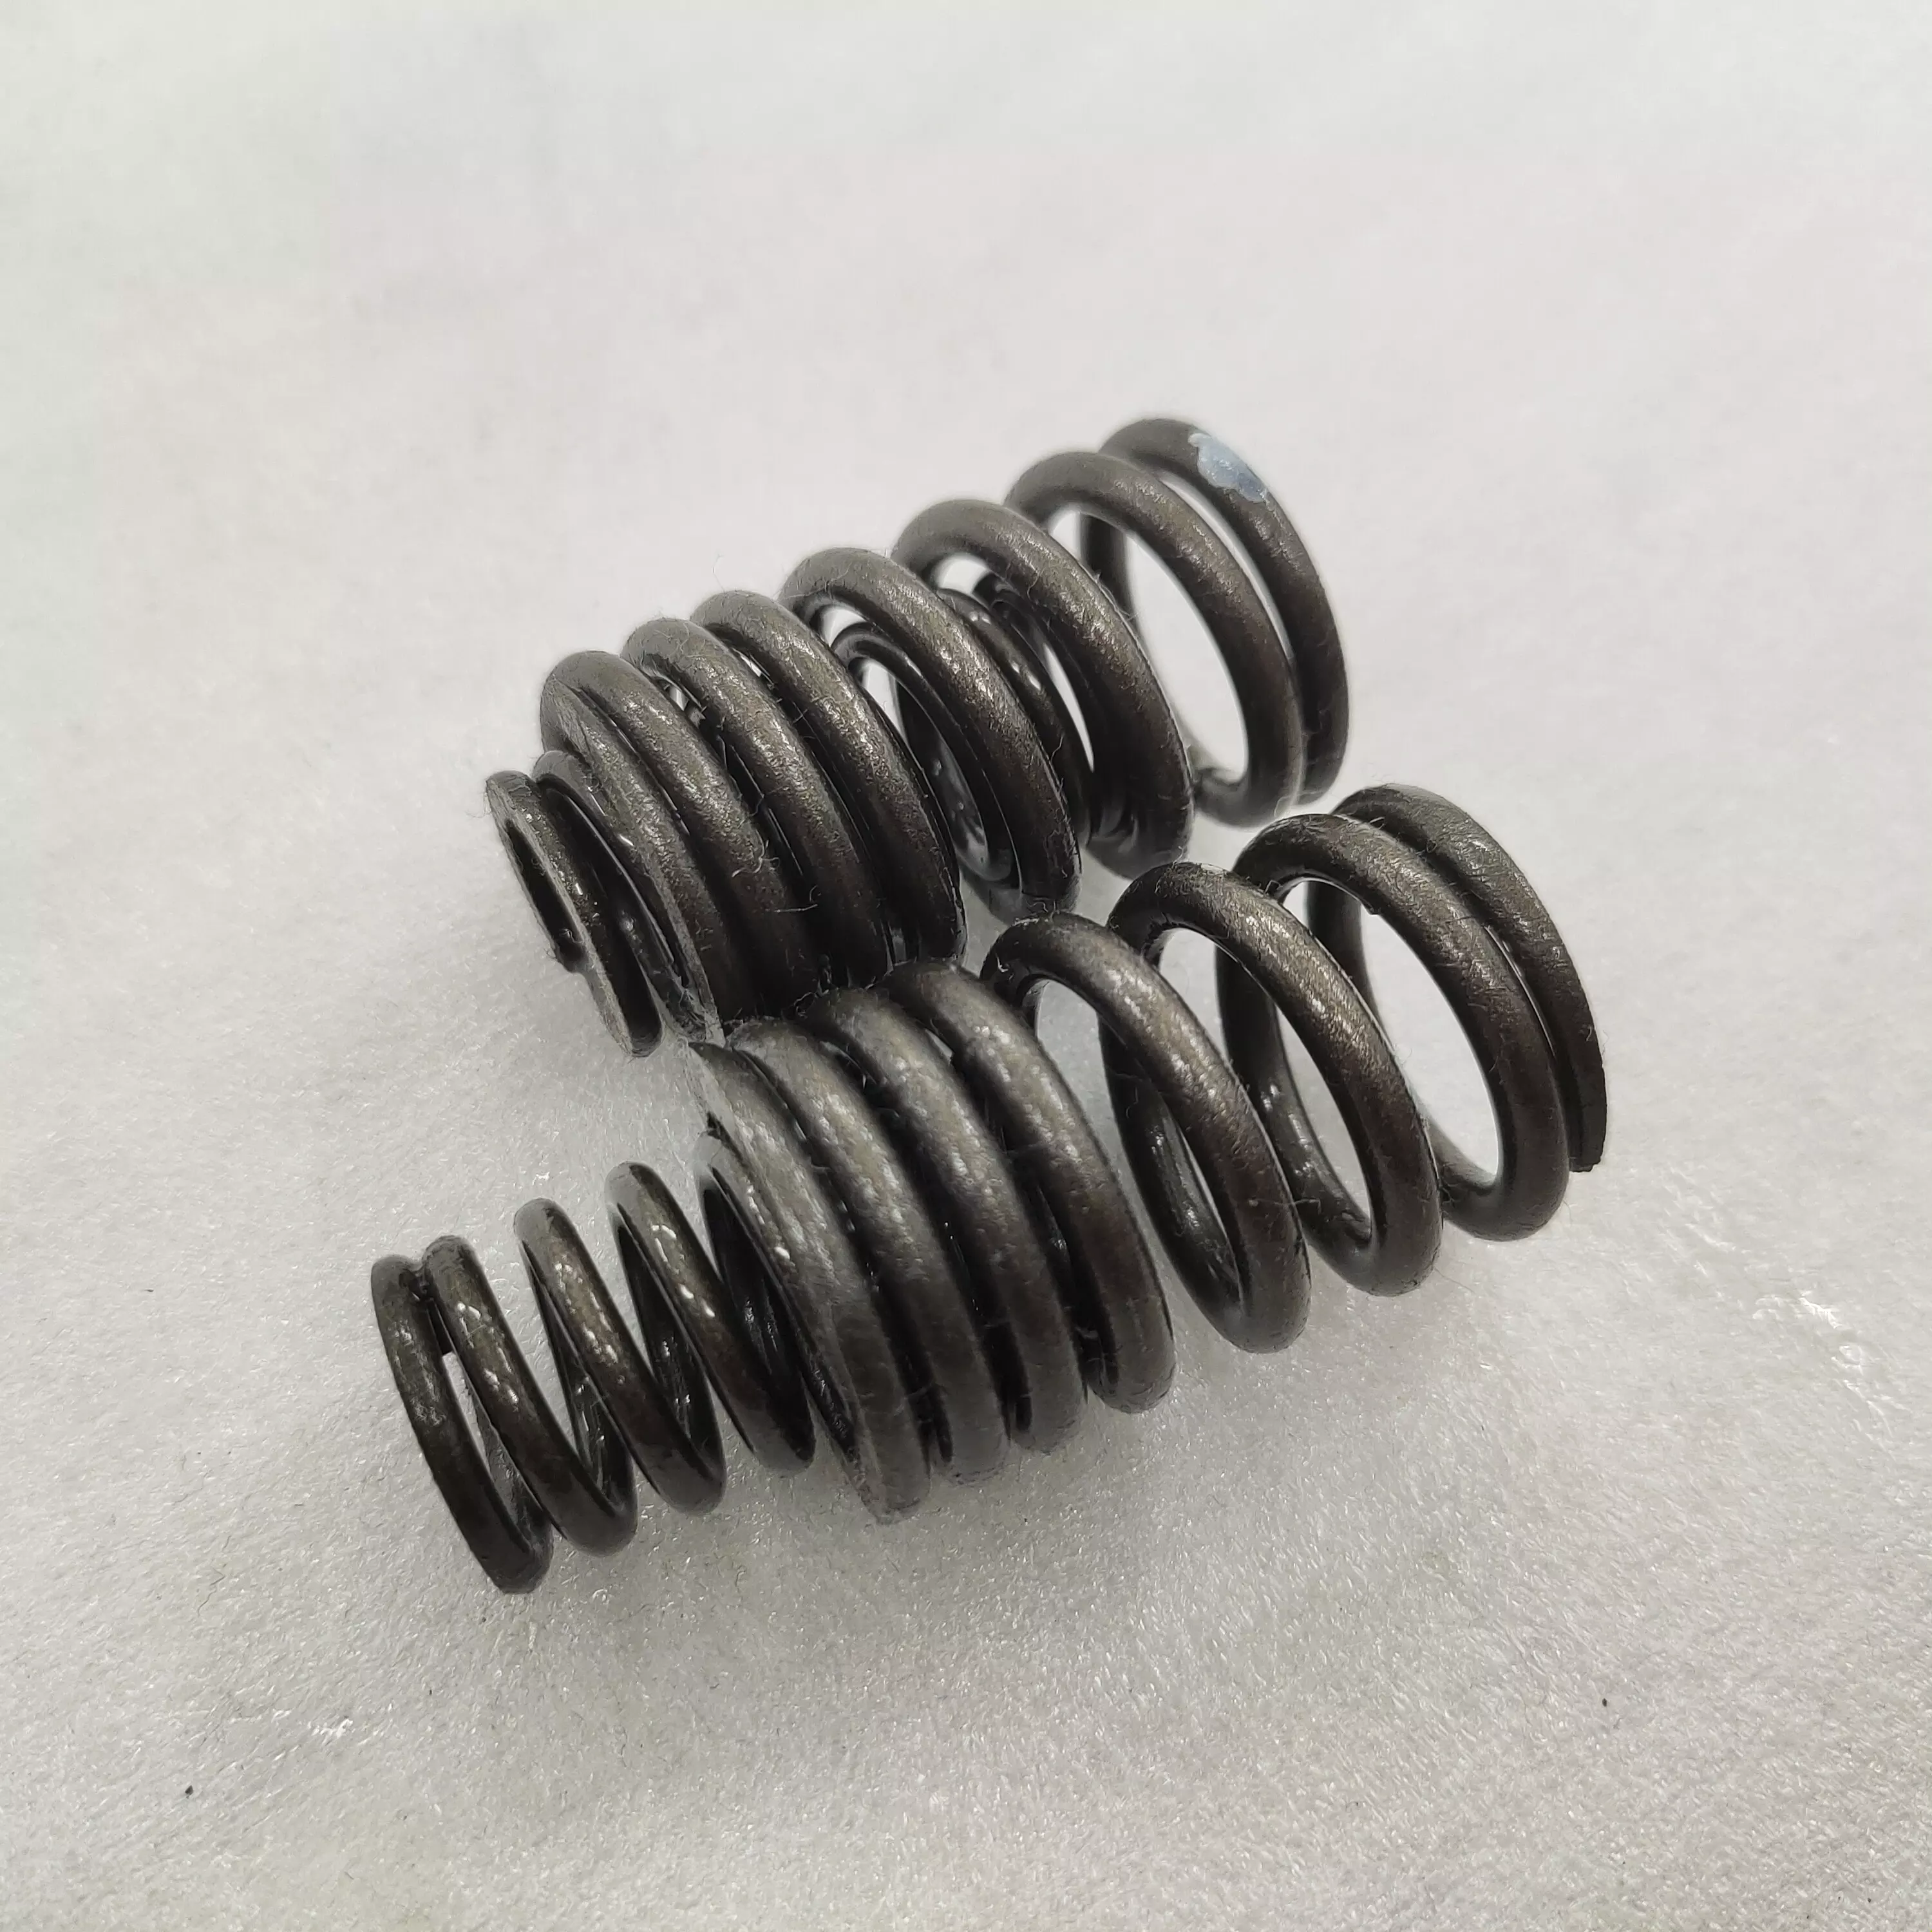 Motorcycle lifan 250cc Engines Valve Compression Spring spare parts  high-strength pressure engine spring